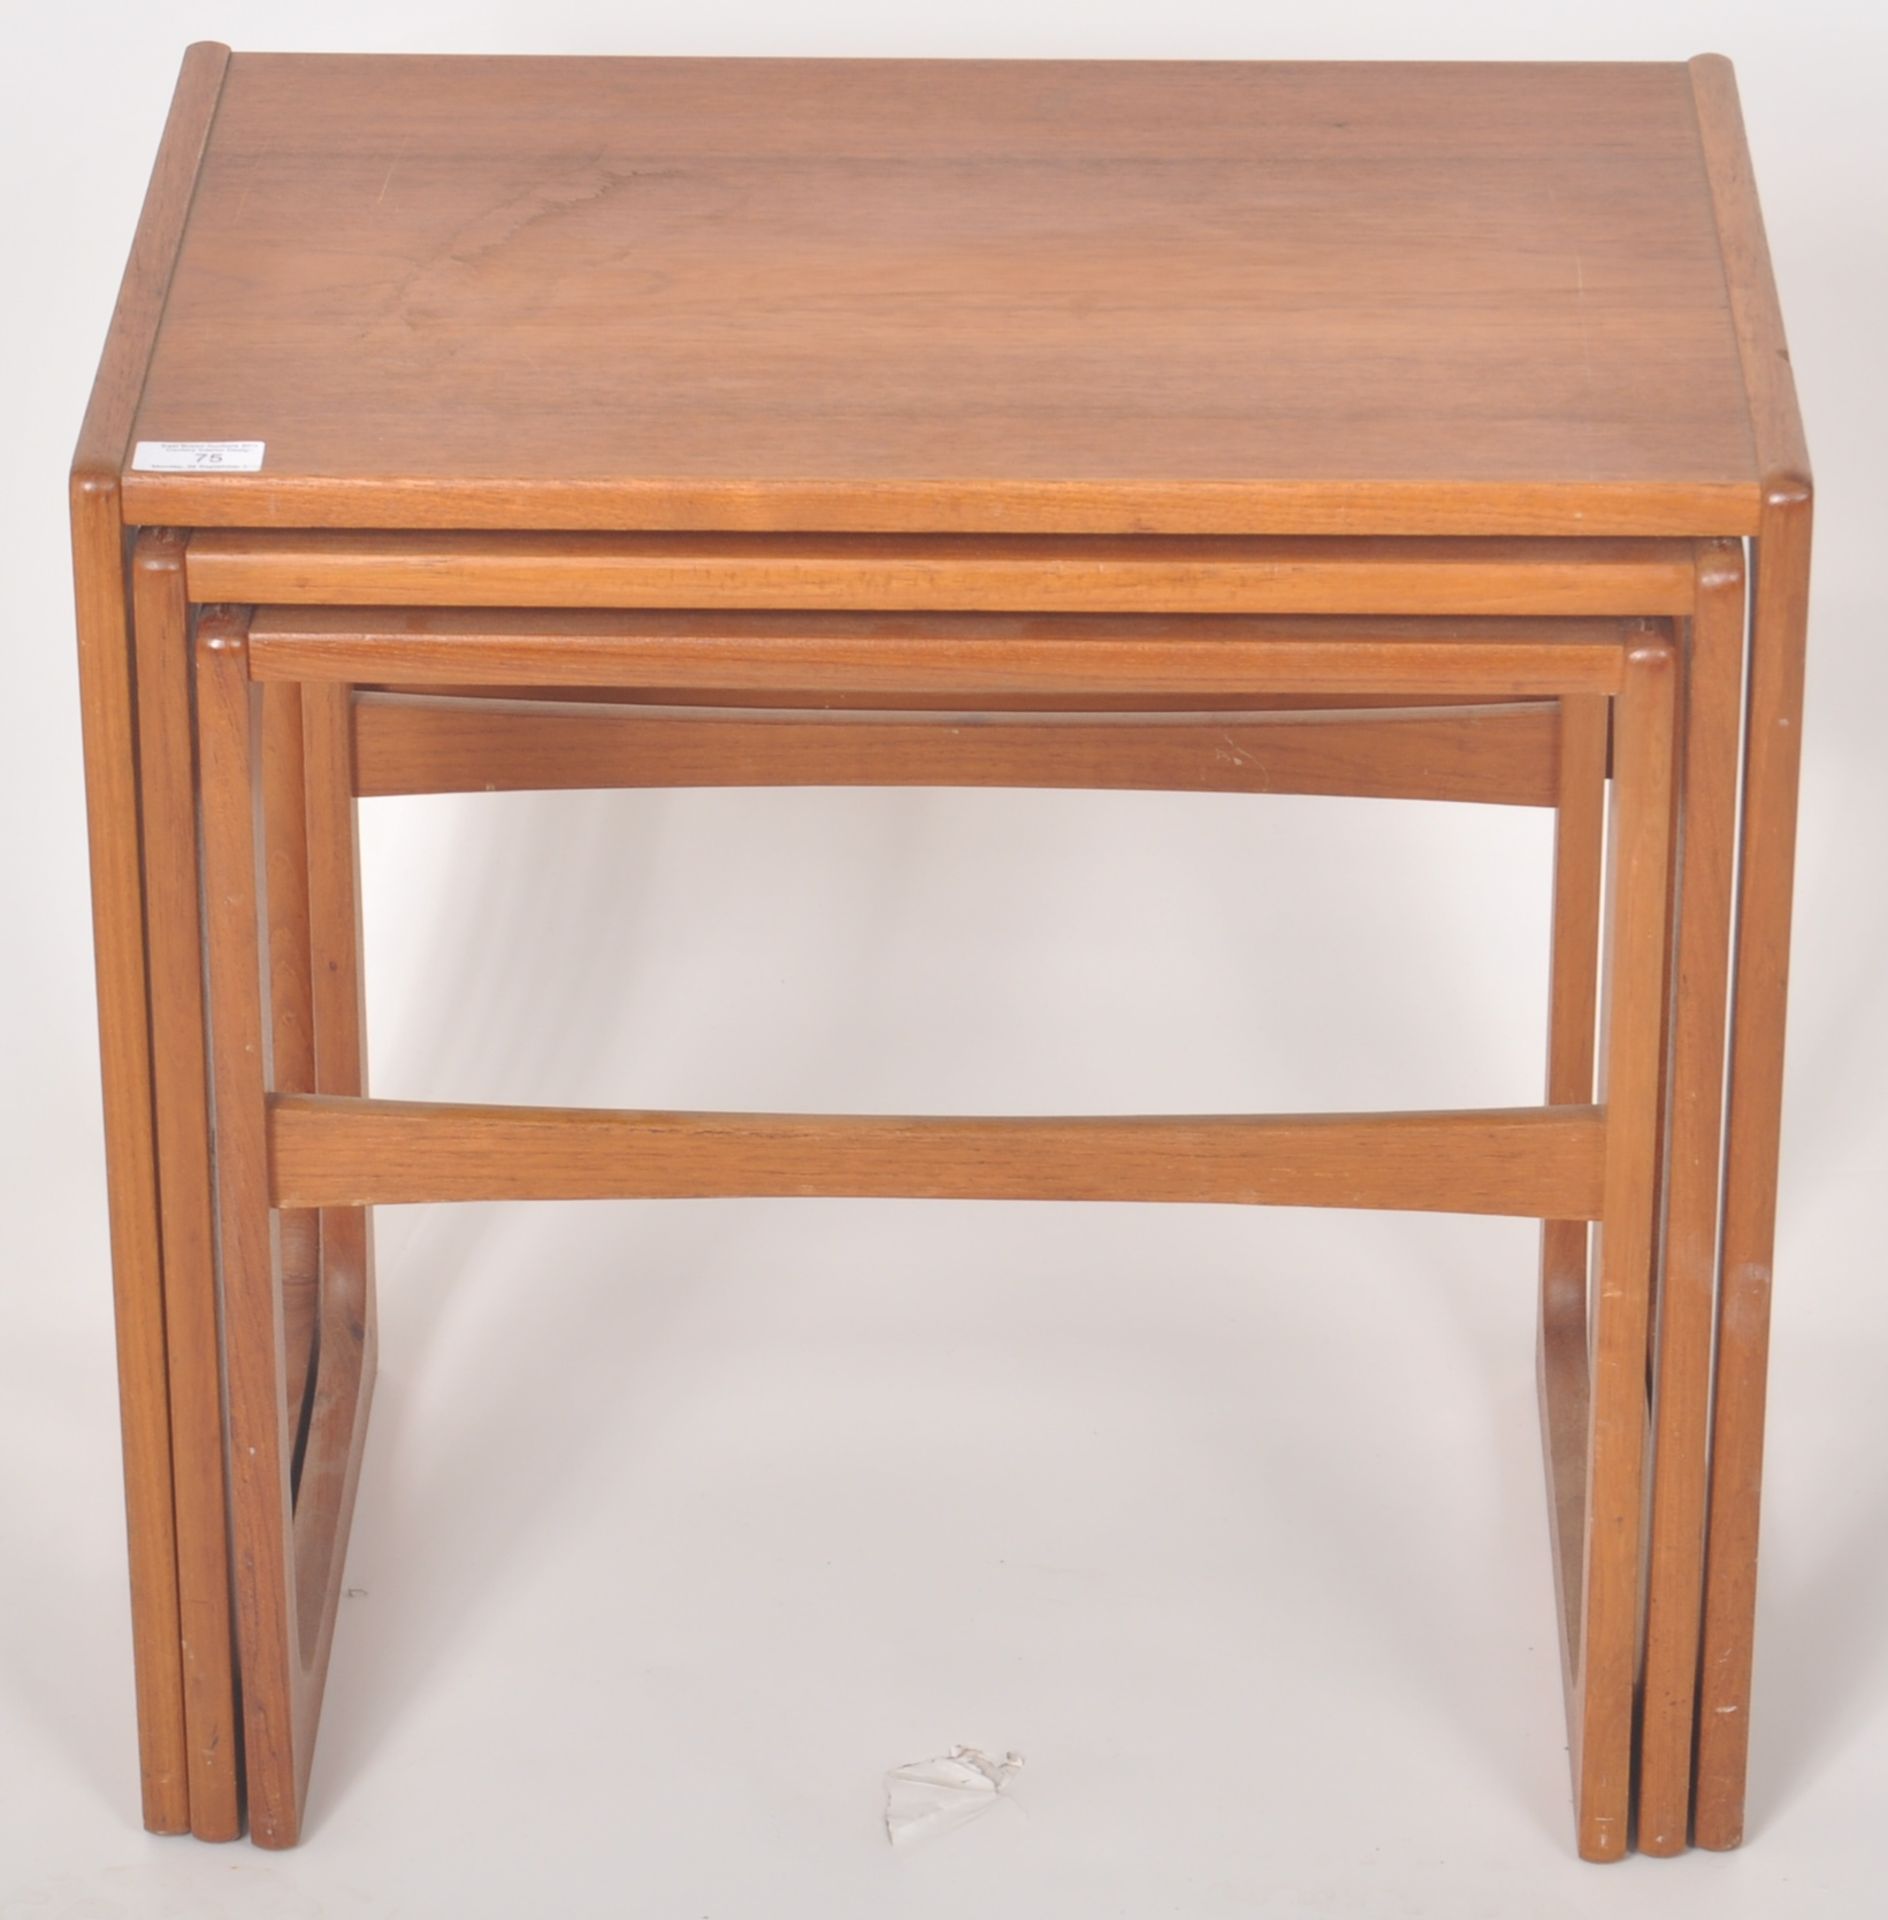 BR GELSTED - DANISH MID CENTURY TEAK NEST OF TABLES - Image 3 of 8